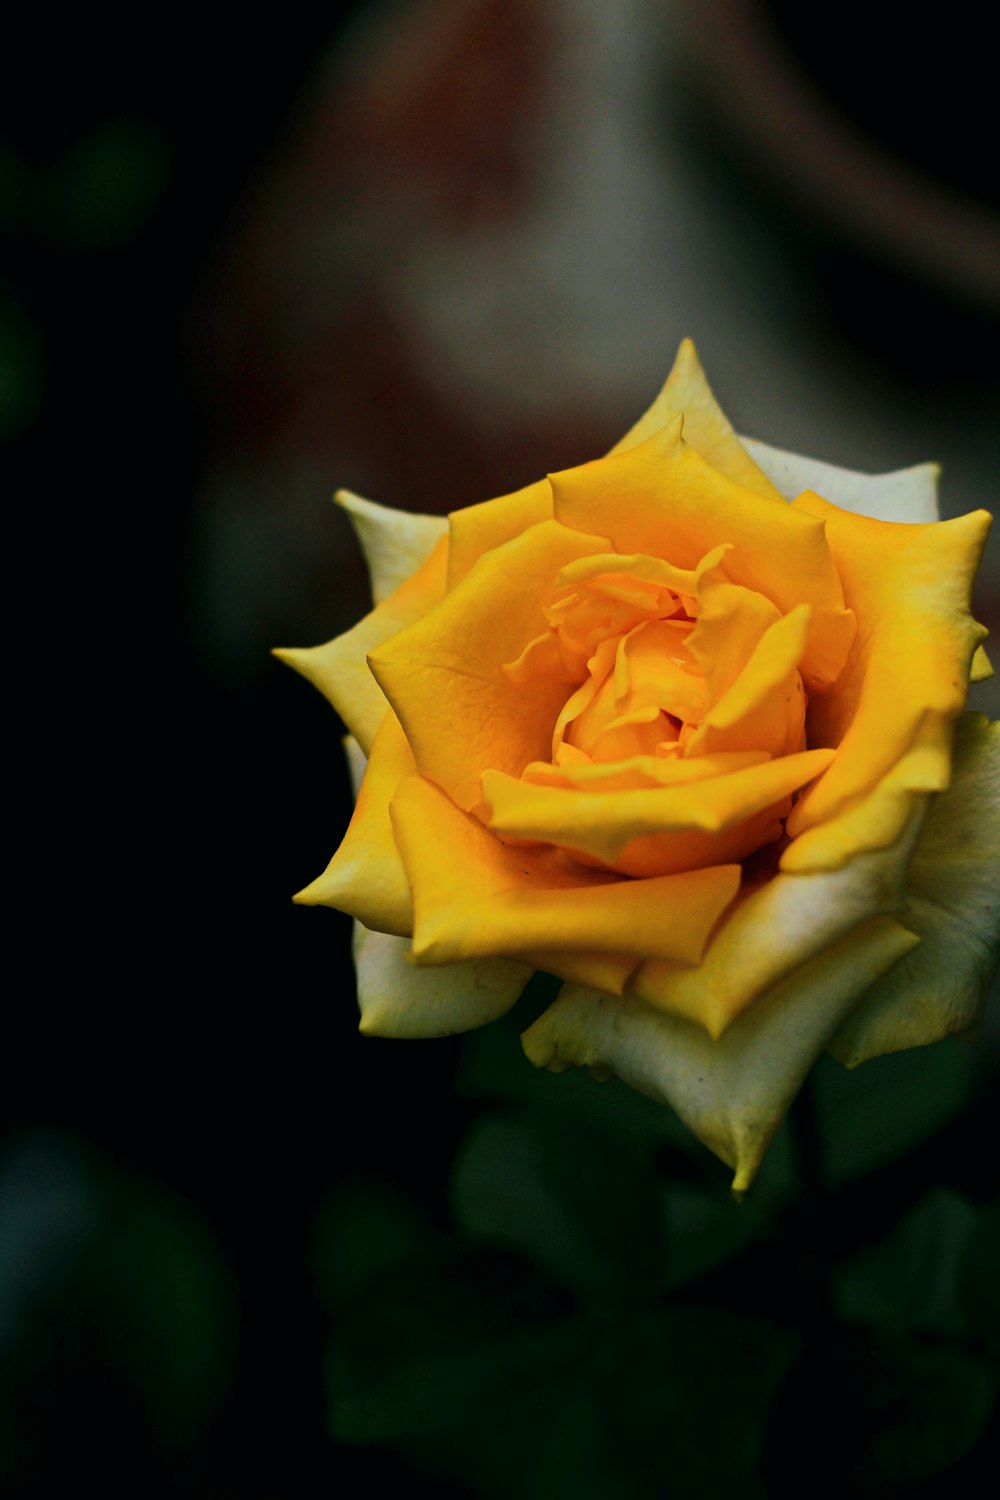 a yellow rose is blooming in a vase